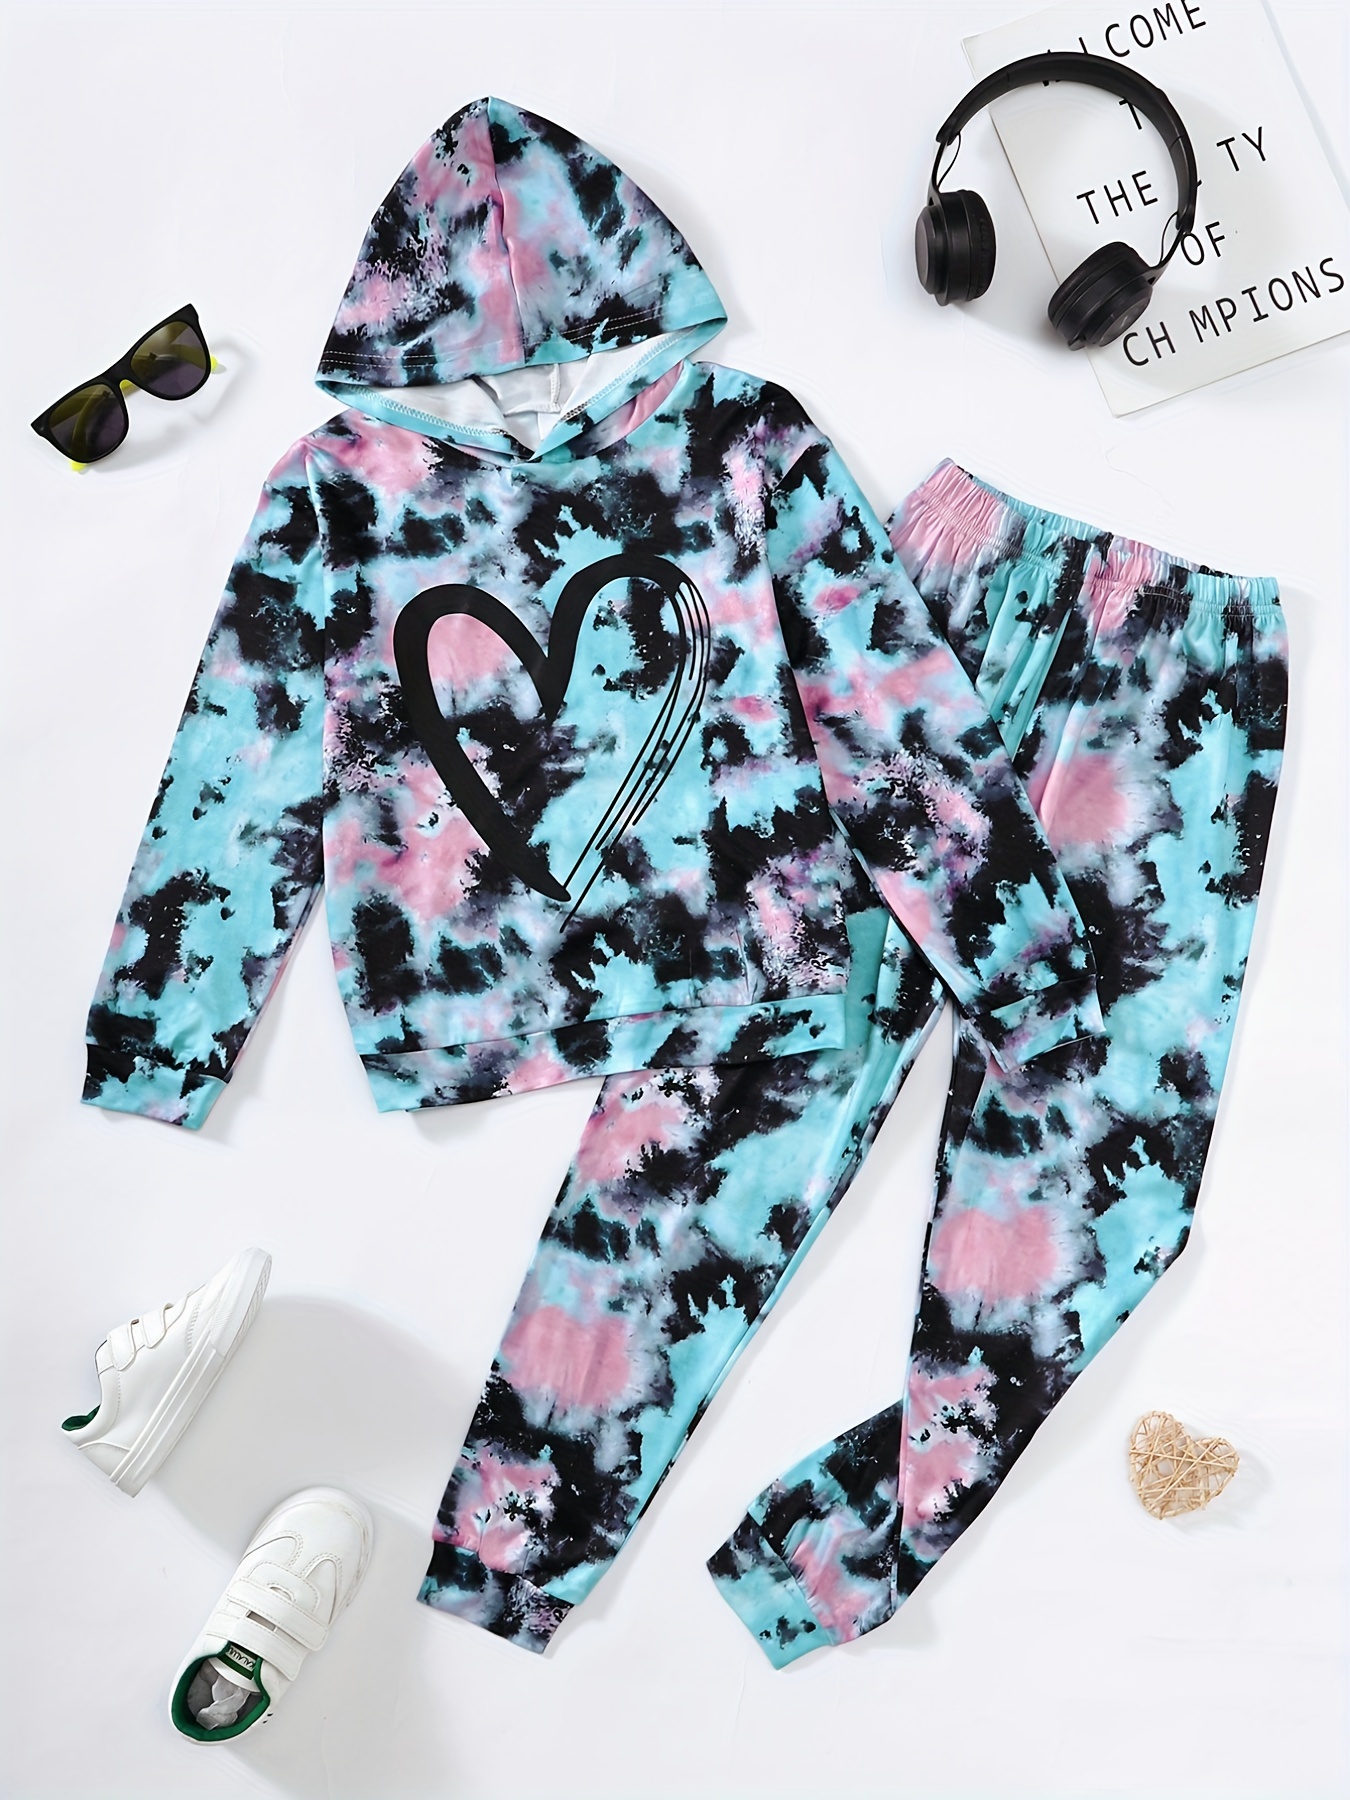 2pcs Girl's Tie-dye Outfit, Daisy Pattern Hoodie & Sweatpants Set, DEAR  GIRL Print Hooded Long Sleeve Top, Kid's Clothes For Spring Fall Winter